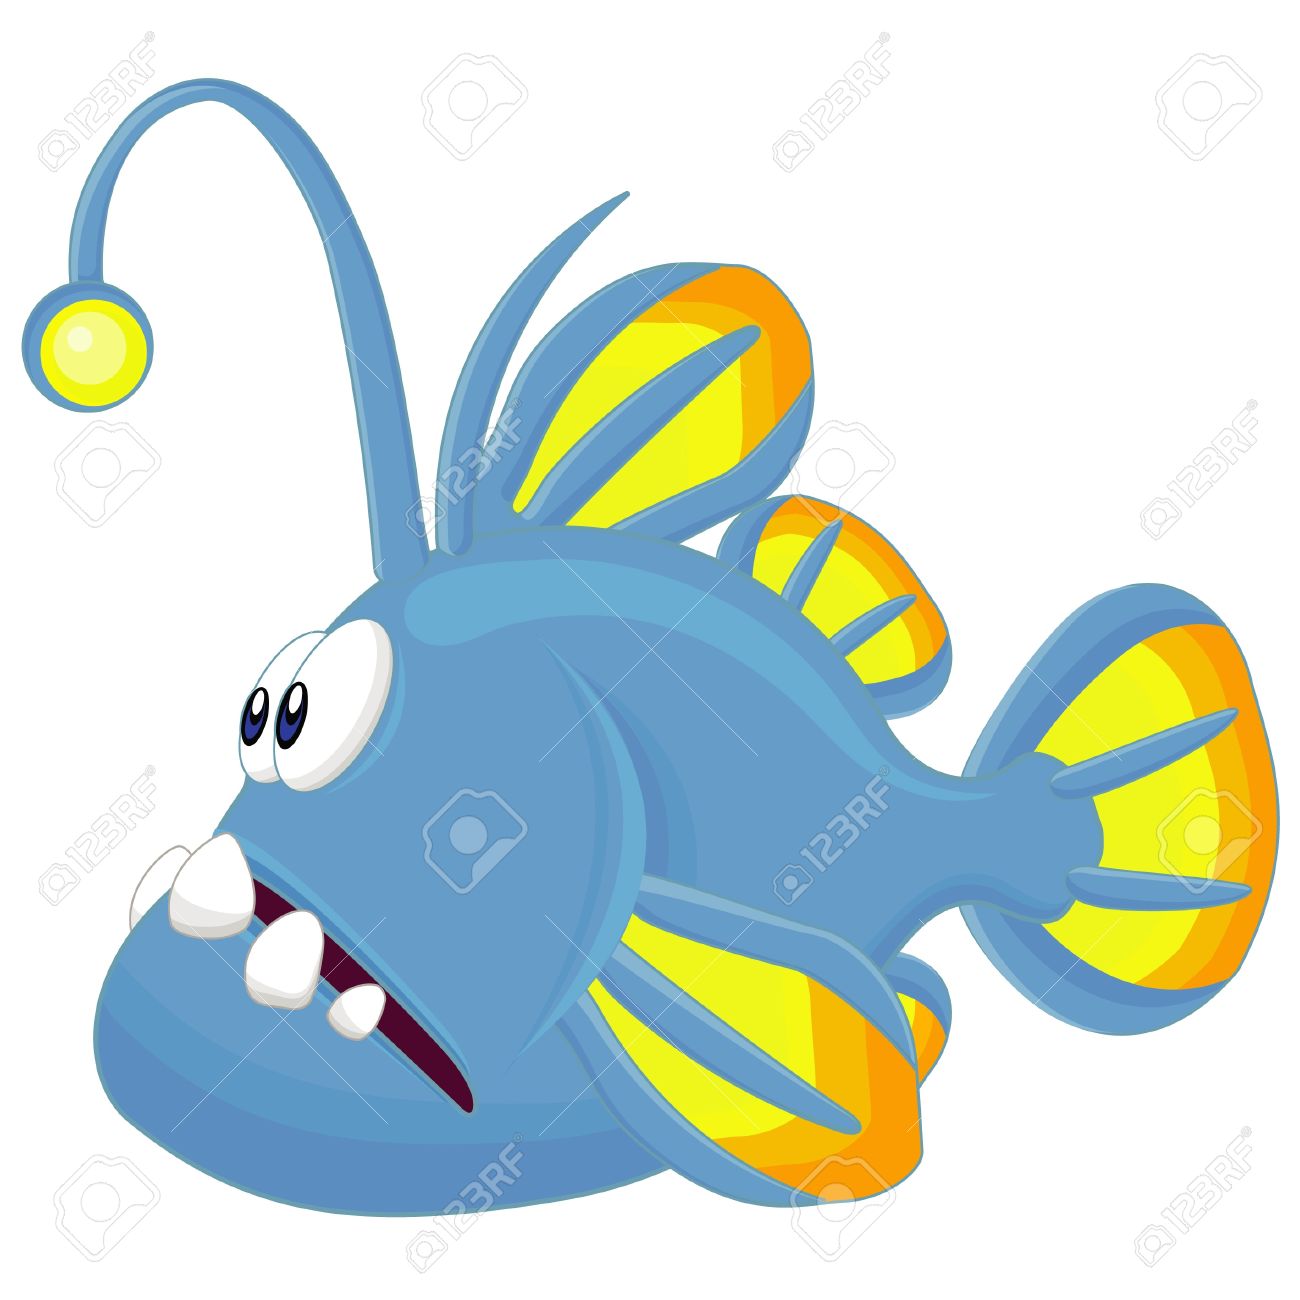 Angler fish clipart 4 » Clipart Station.